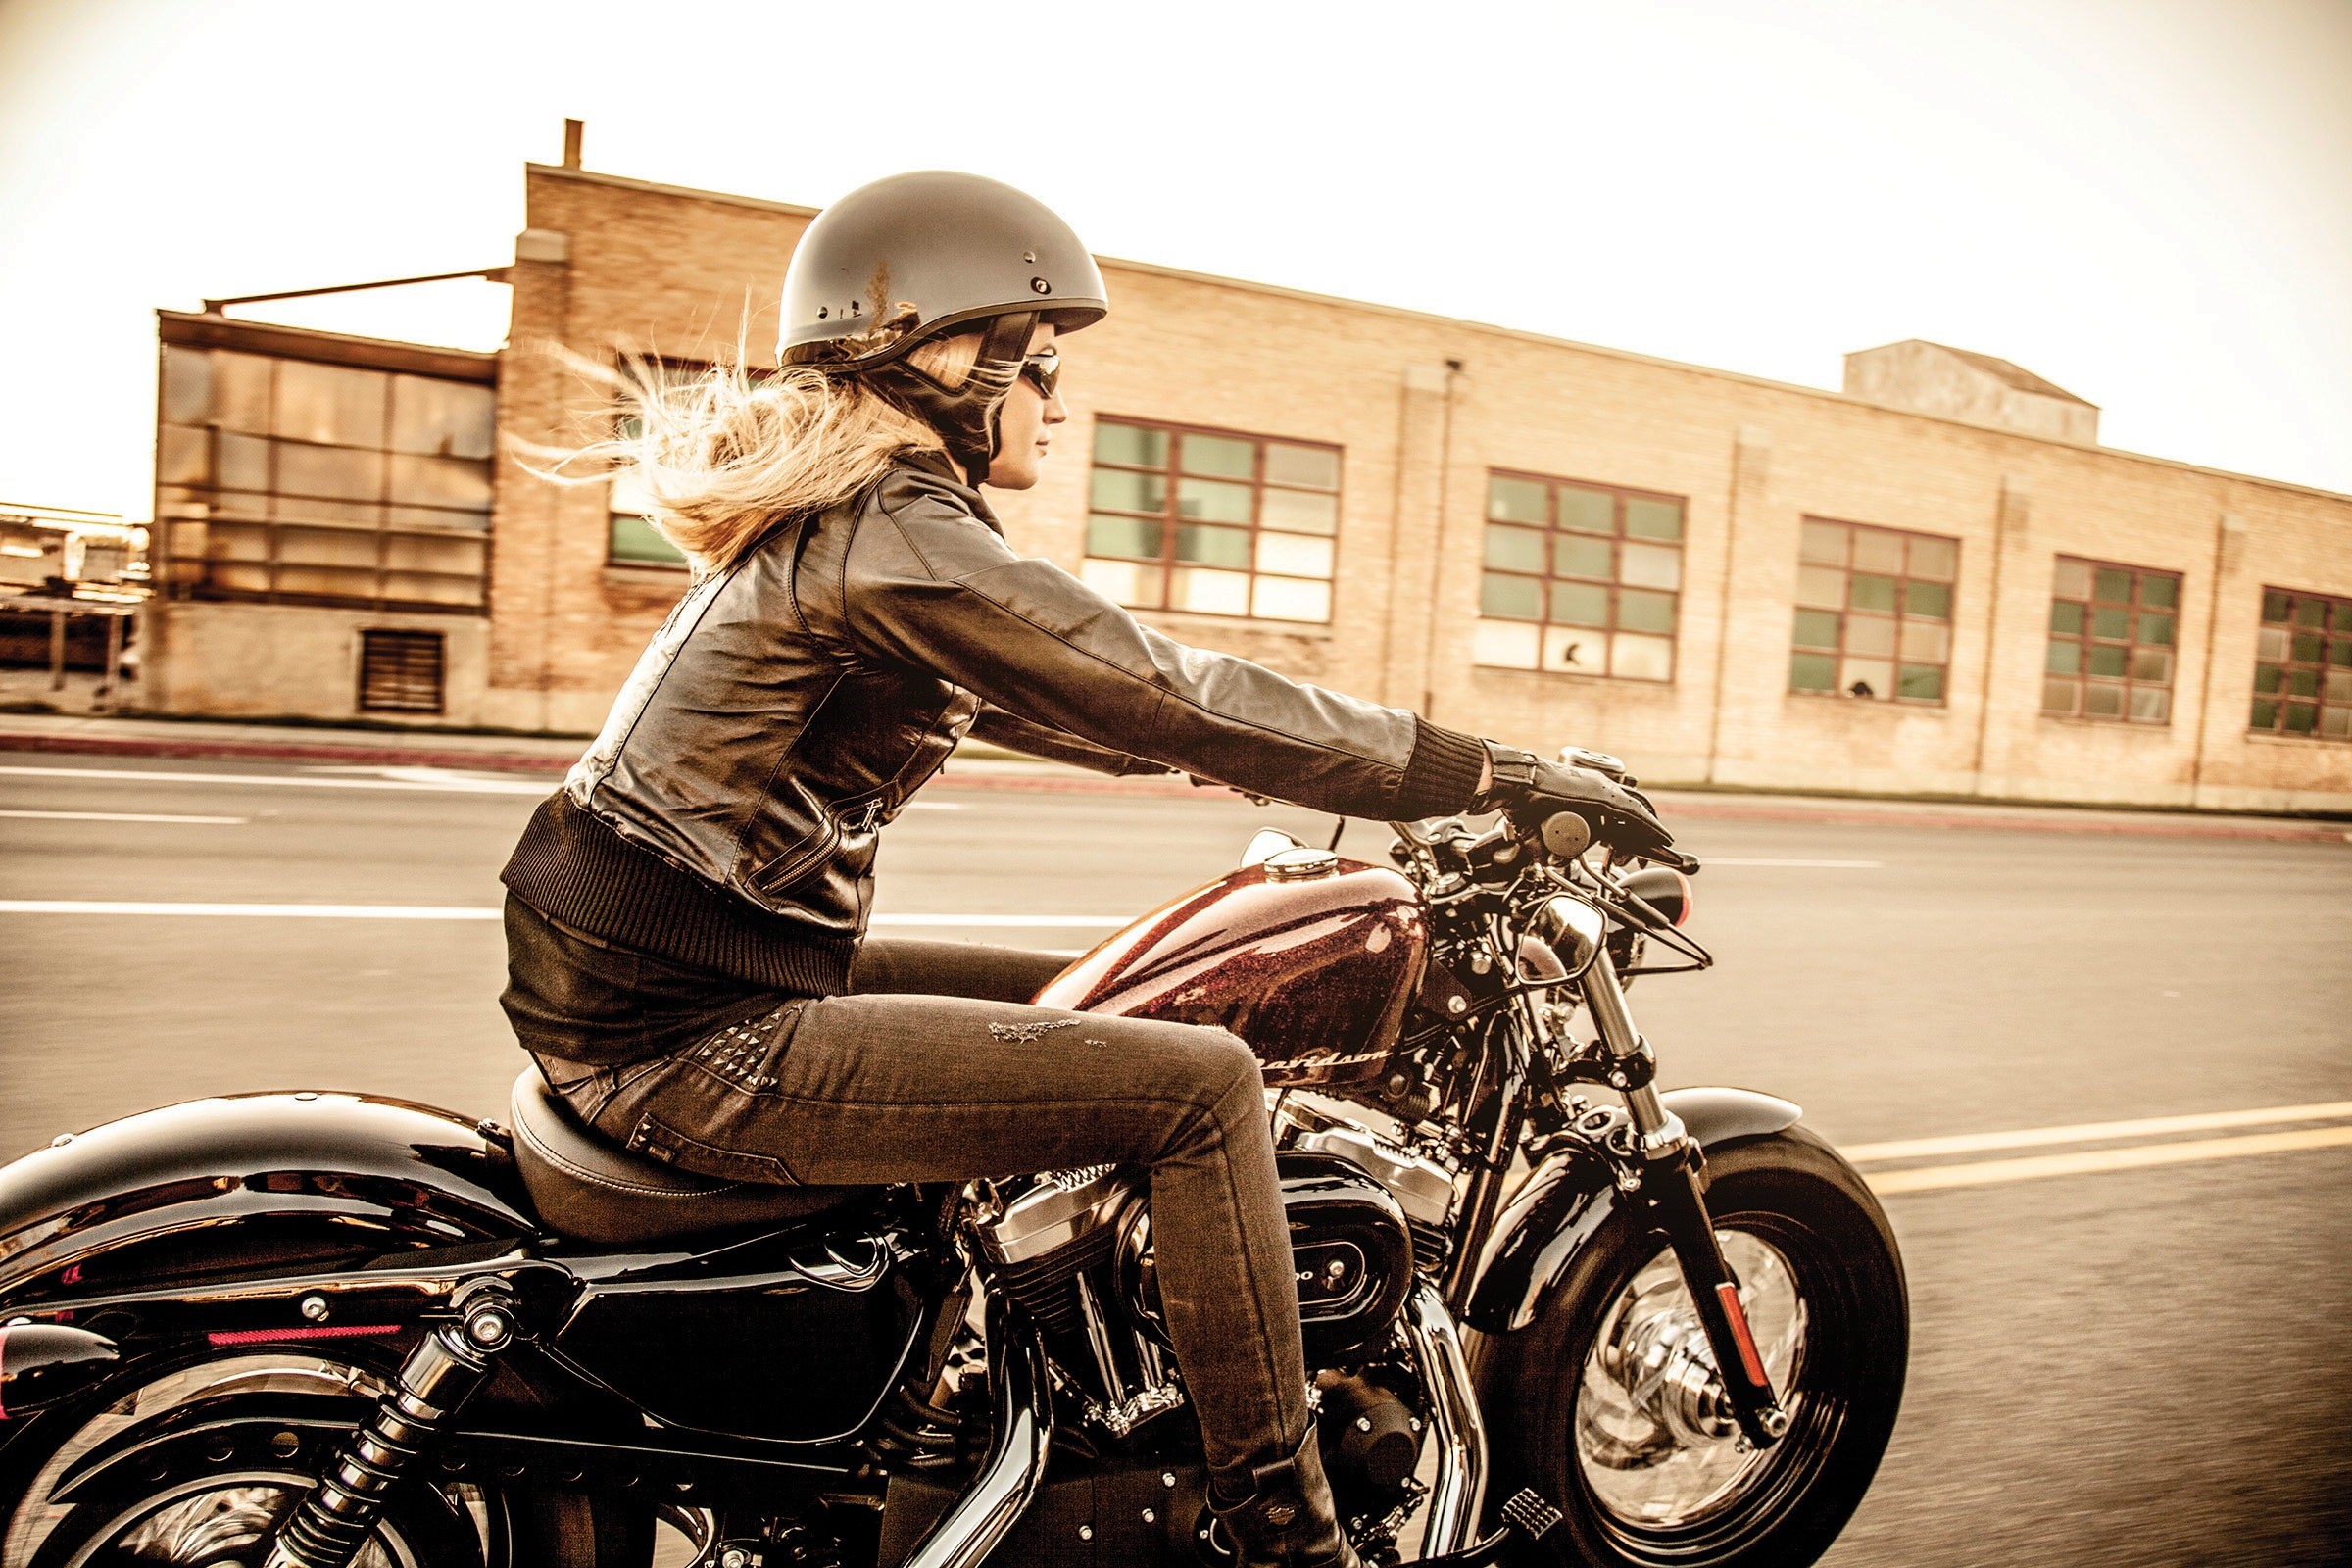 Rent a Harley Davidson Motorcycle for 7 Days and Tour the Open Road!